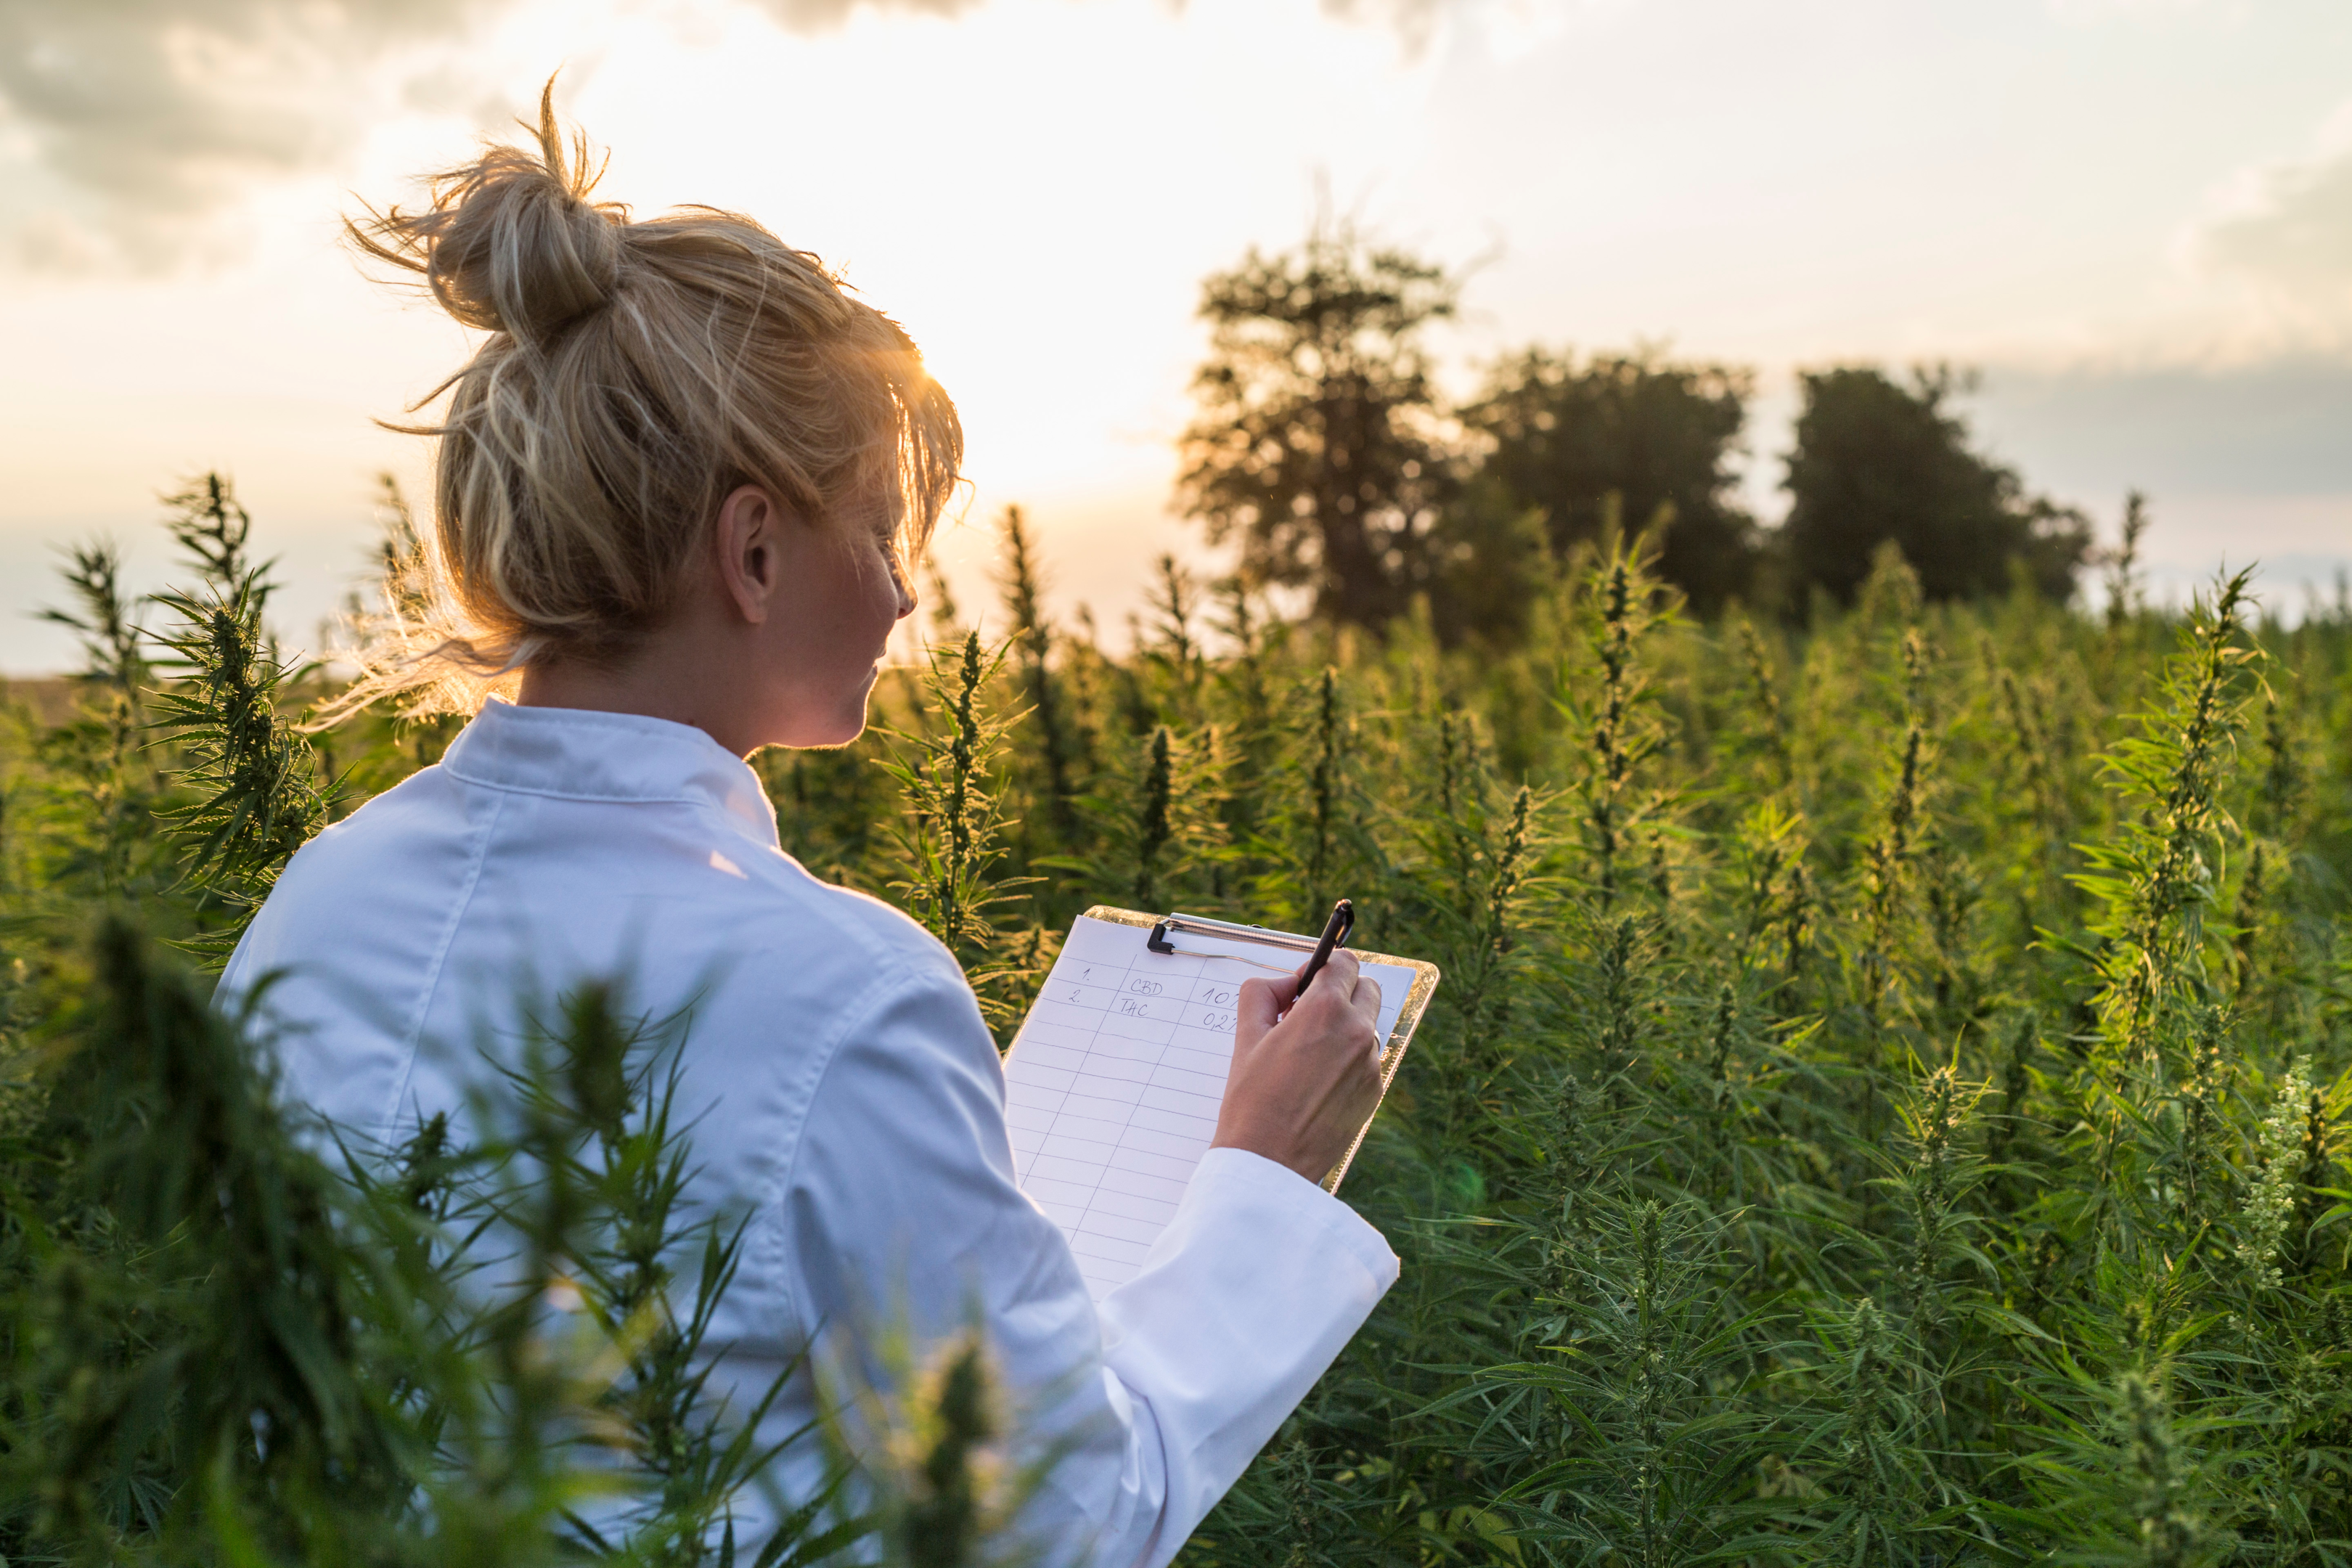 Women in the business of cannabis offers fresh perspectives and approaches. Women Grow is a business designed to help women get into and advance within the industry.